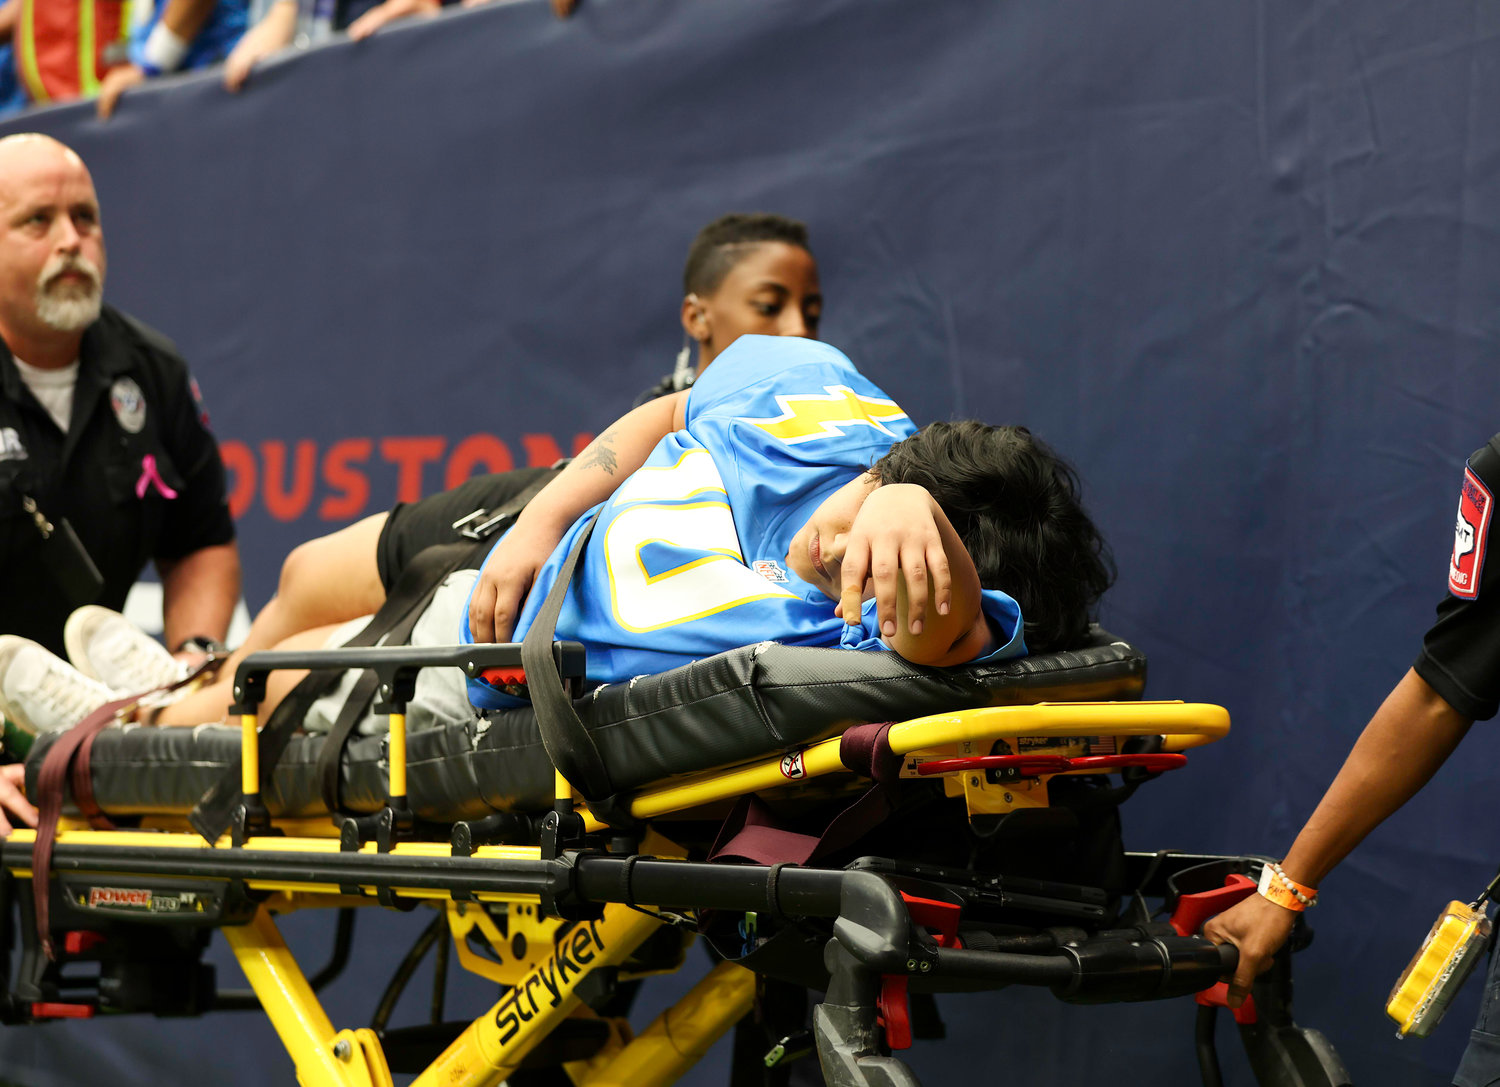 A fan experiencing a medical emergency is stretchered off the field after being lowered from the stands during an NFL game between the Texans and the Chargers on Oct. 2, 2022 in Houston. The Chargers won 34-24.